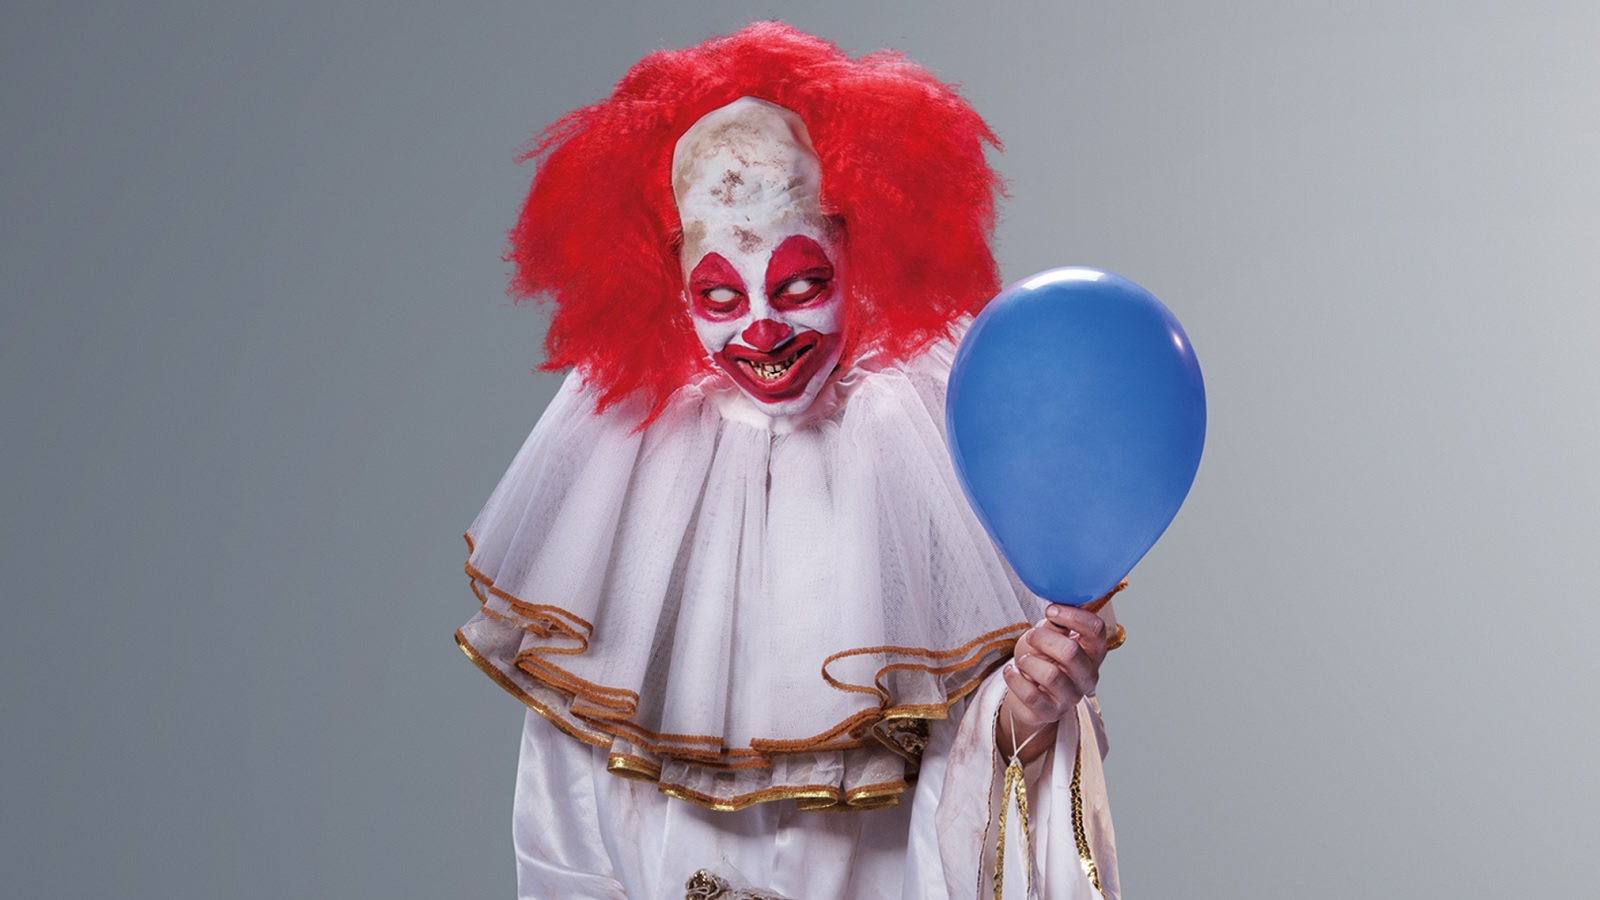 Coming Soon: Pennywise-Like Clown Celebrates Bookstore’s Anniversary